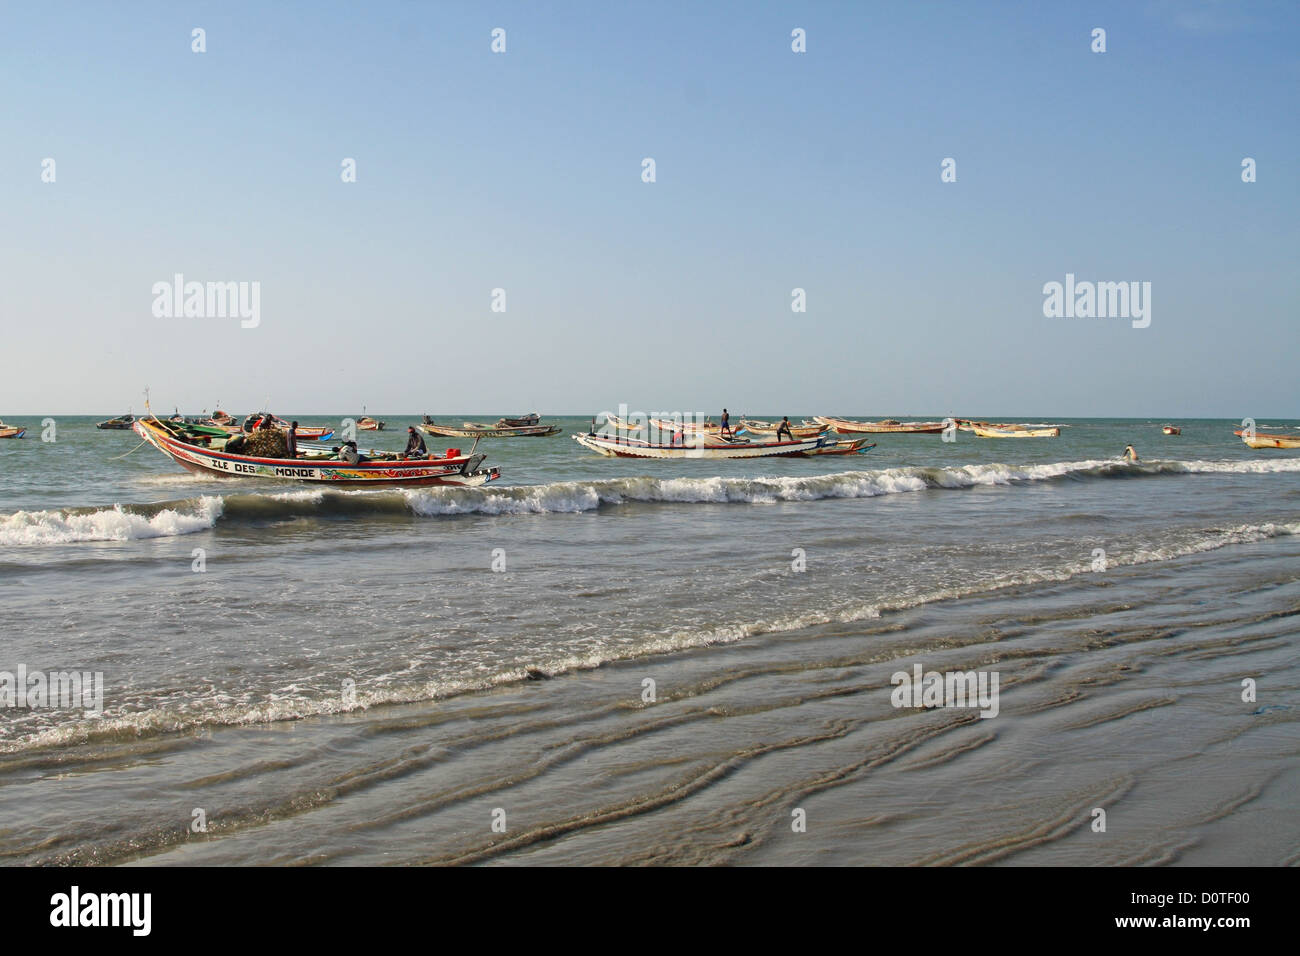 The beach at Tanji fishing village, The Gambia, West Africa Stock Photo